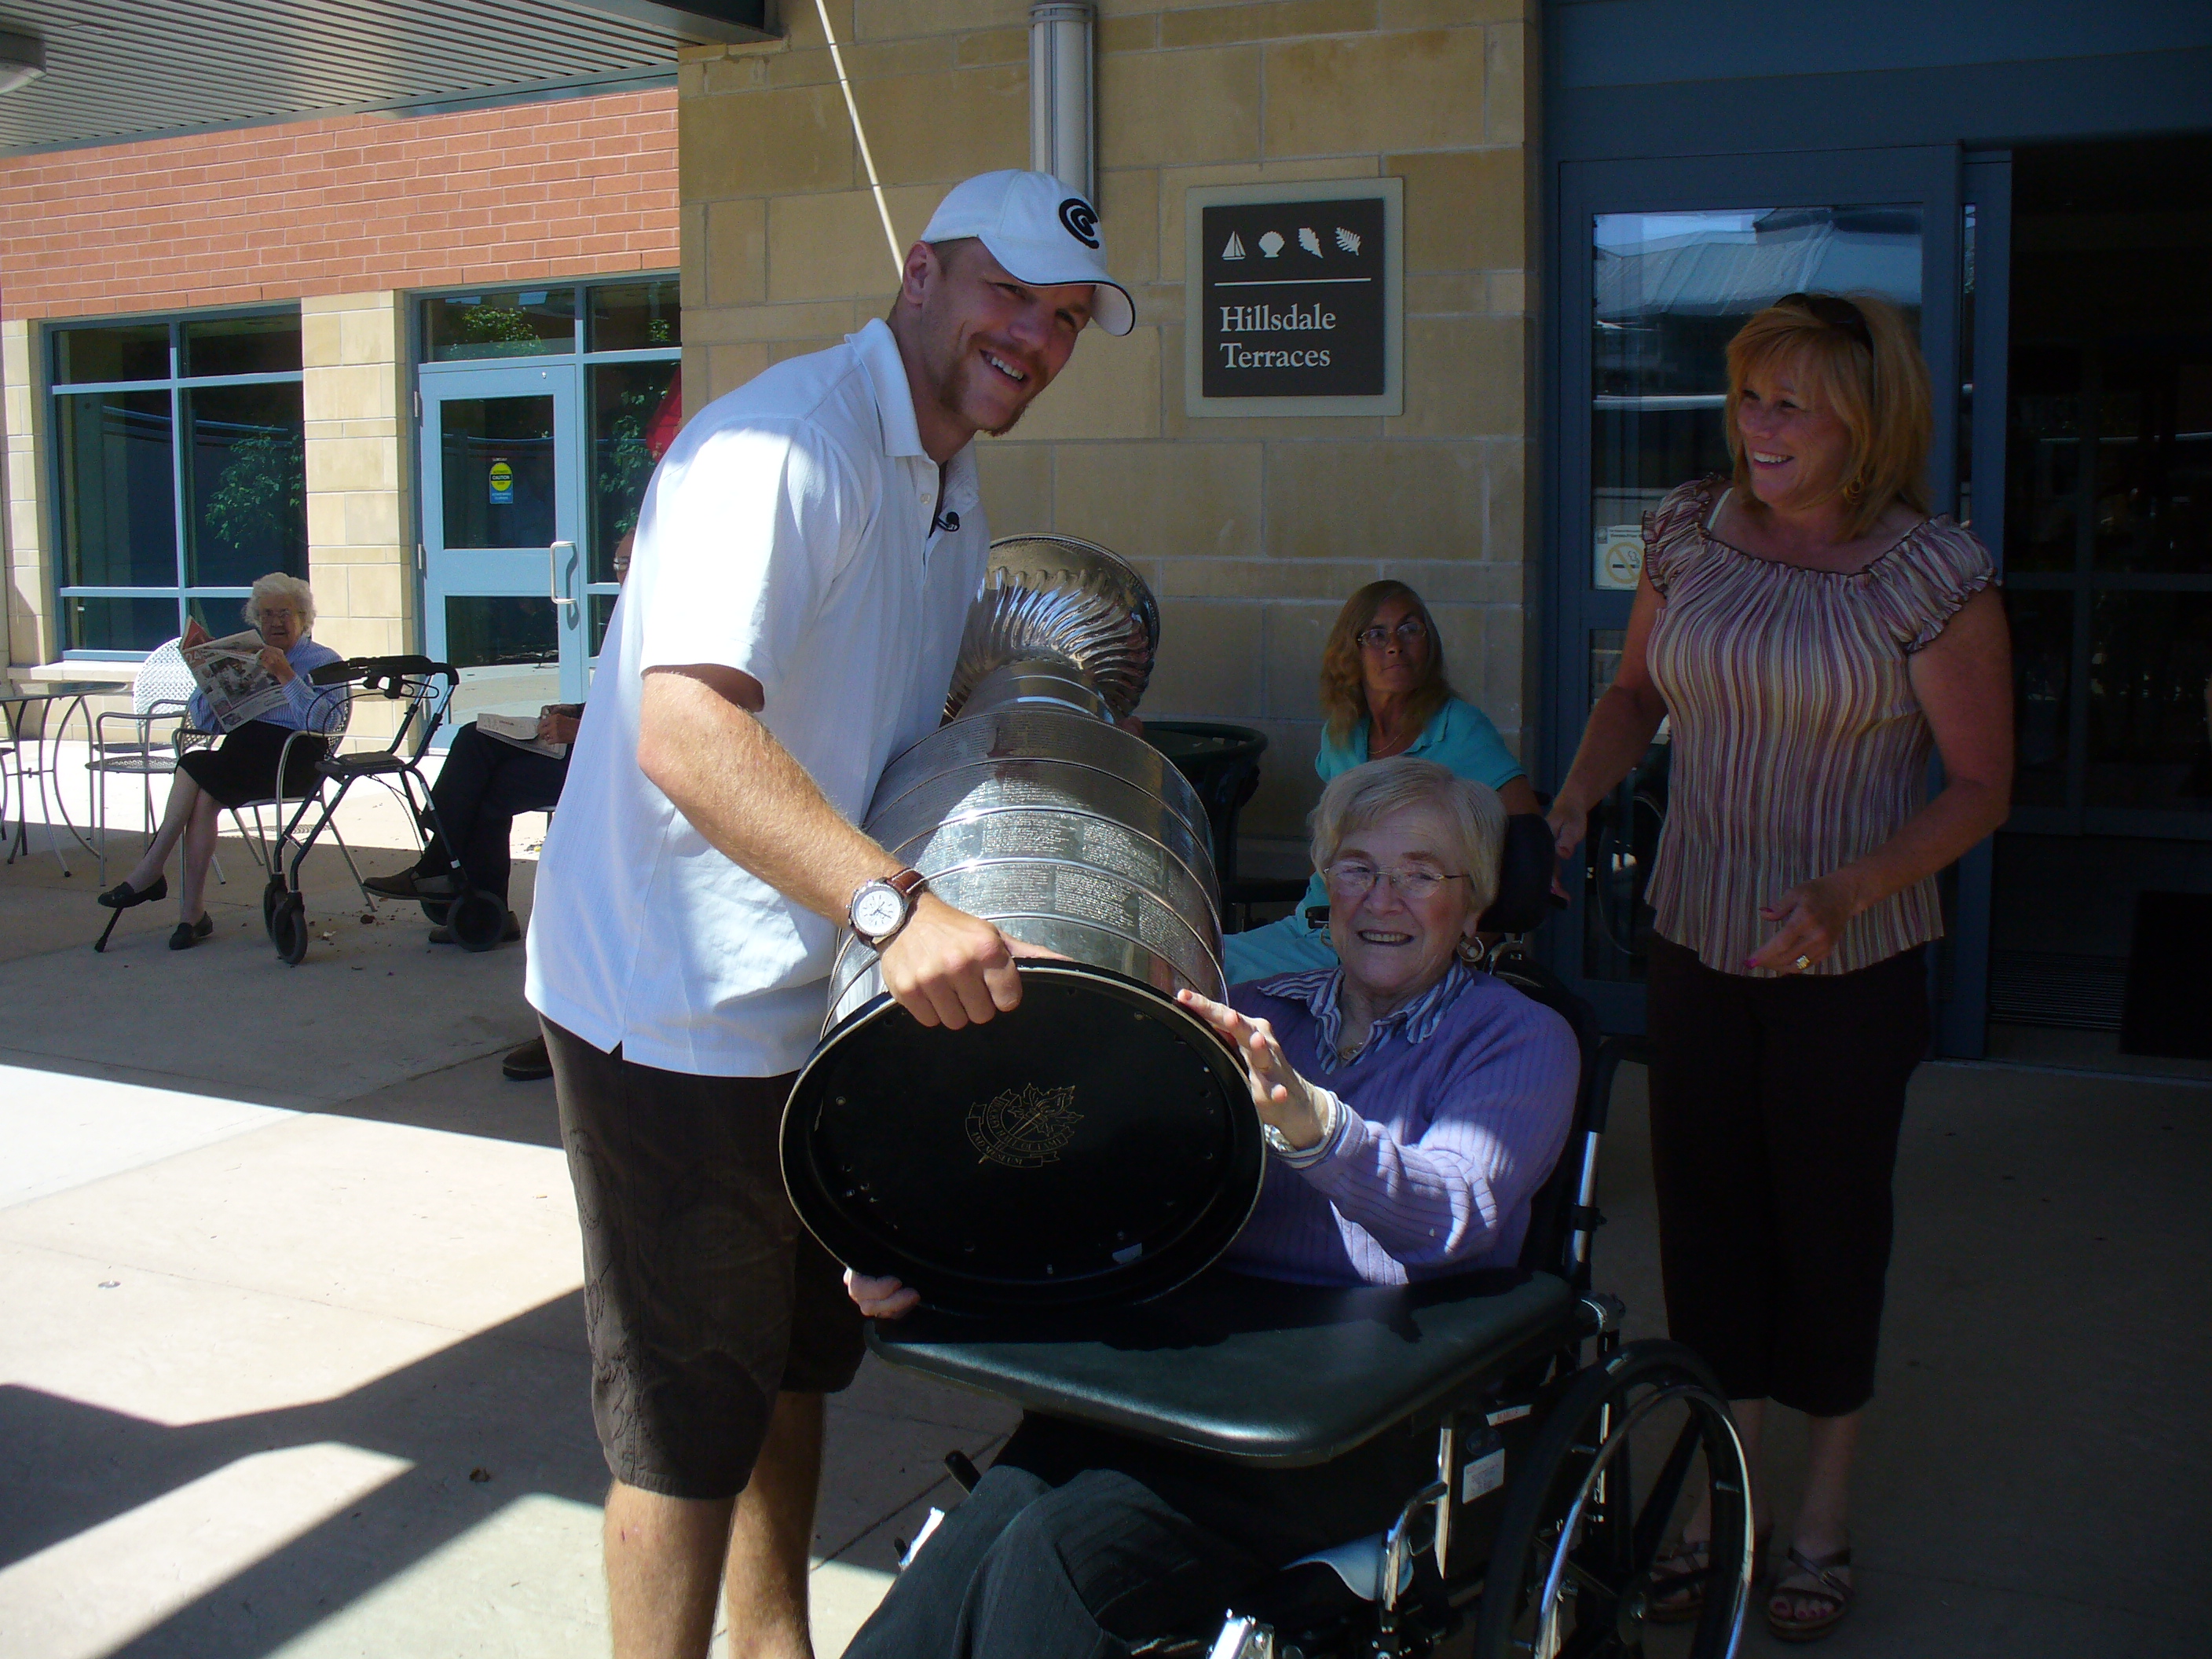 shawn thornton with fans and the stanley cup